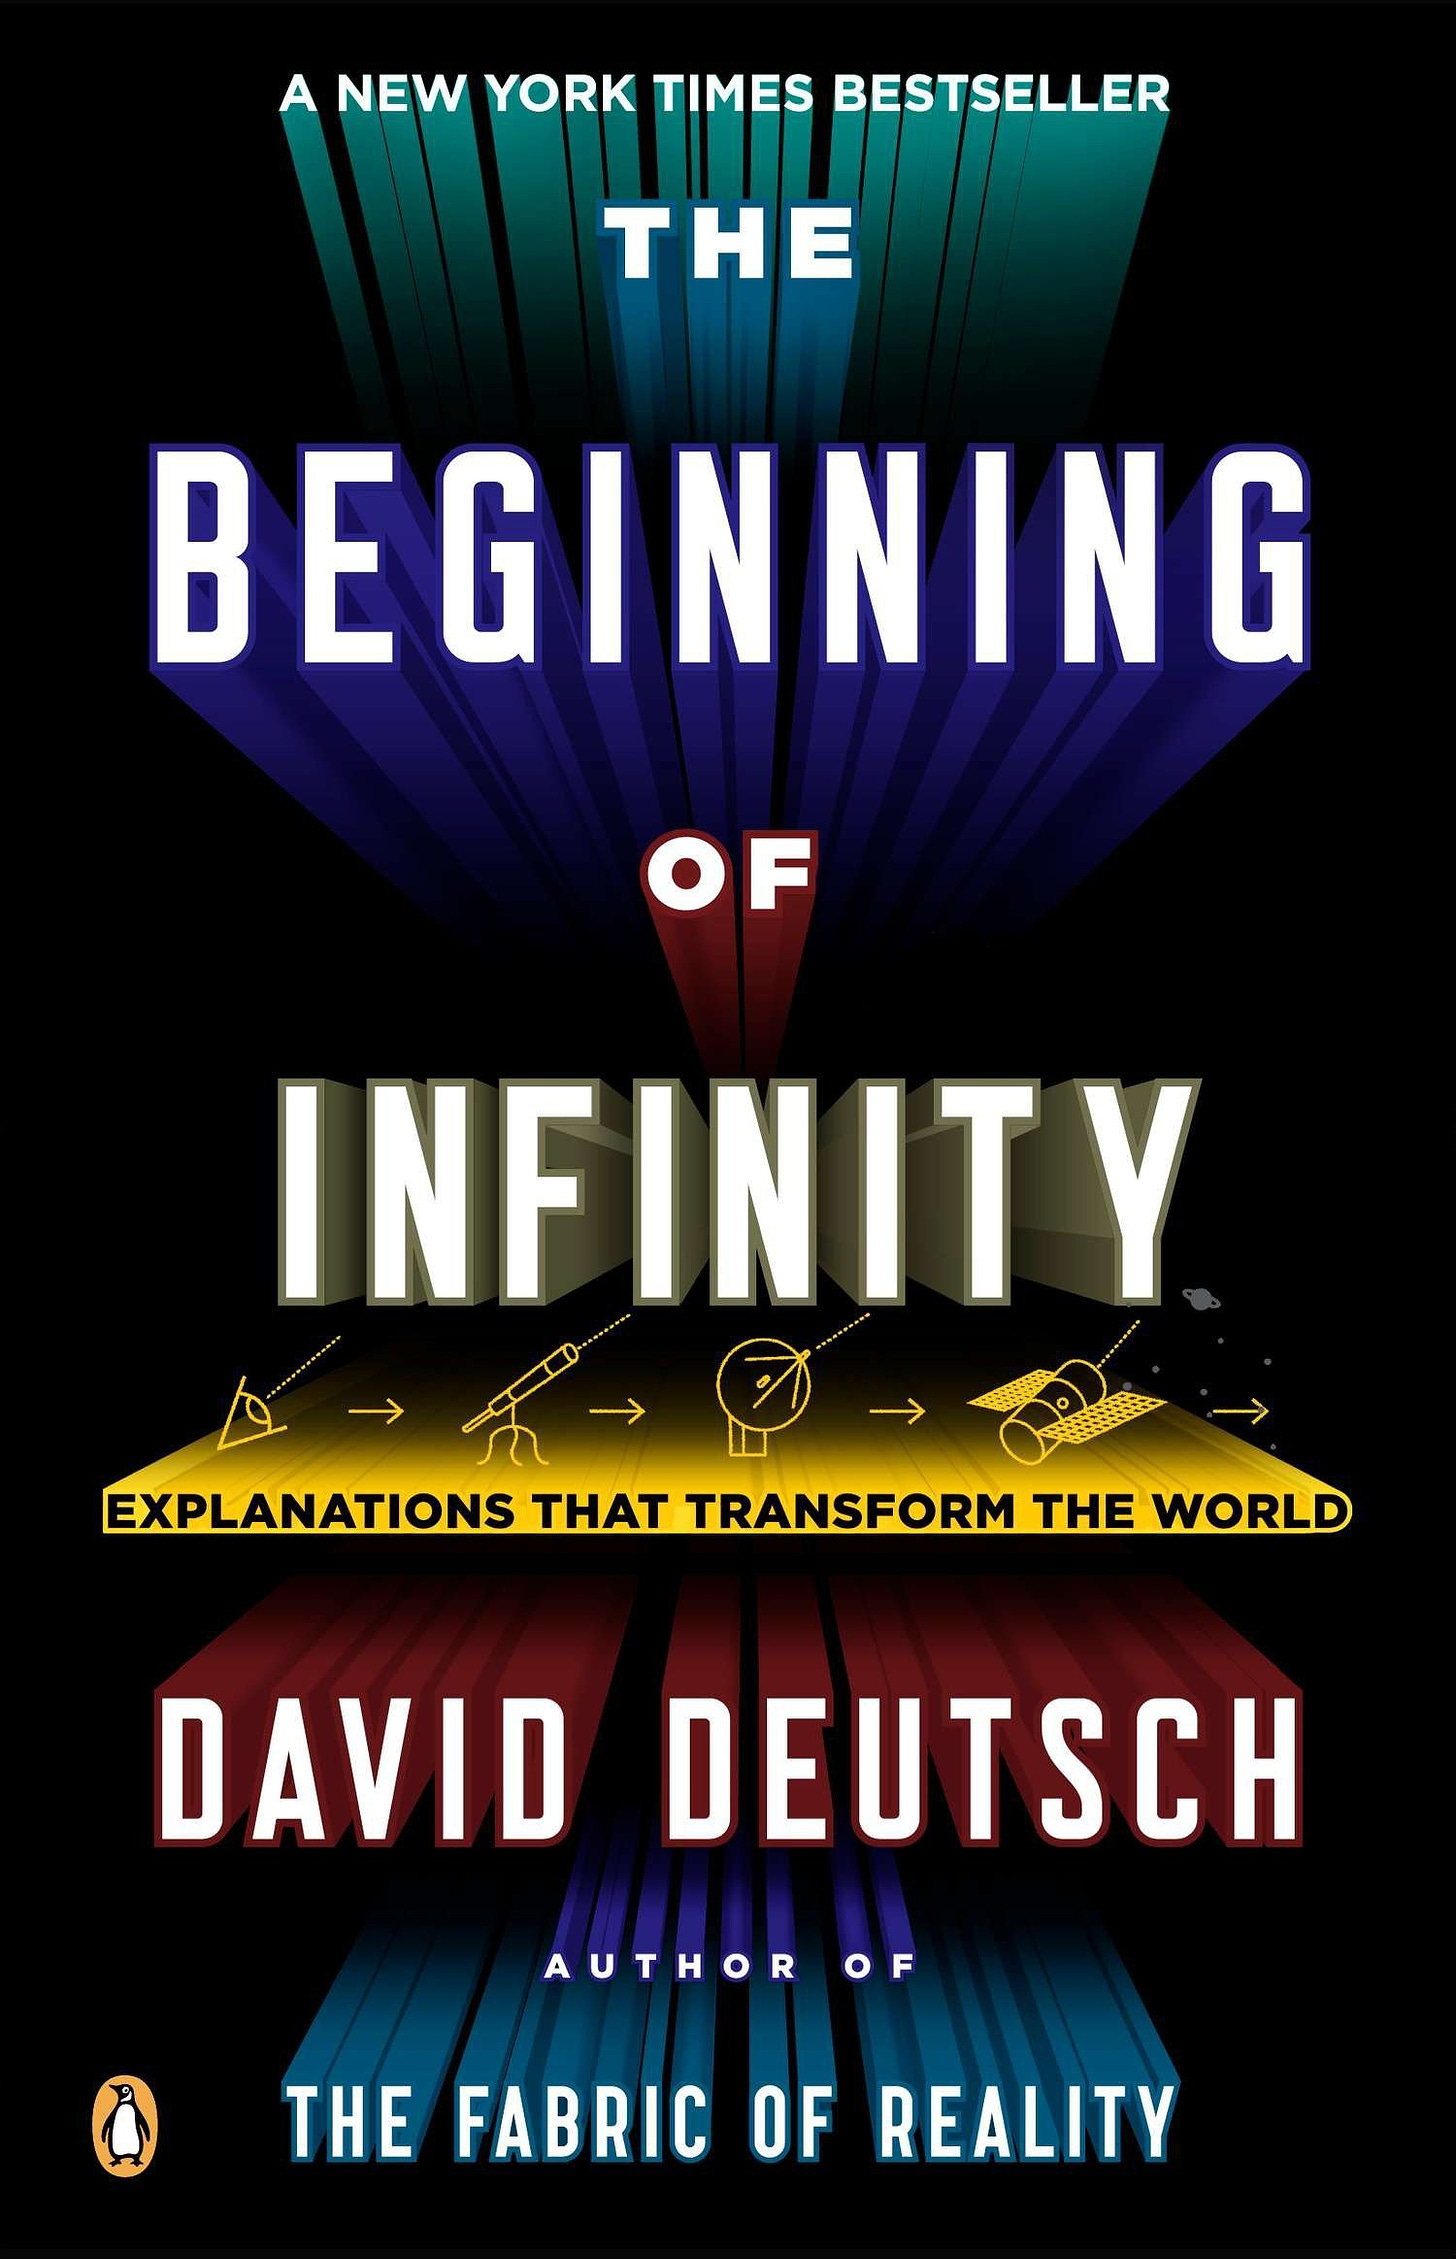 Buy The Beginning of Infinity: Explanations That Transform the World Book  Online at Low Prices in India | The Beginning of Infinity: Explanations  That Transform the World Reviews &amp; Ratings - Amazon.in